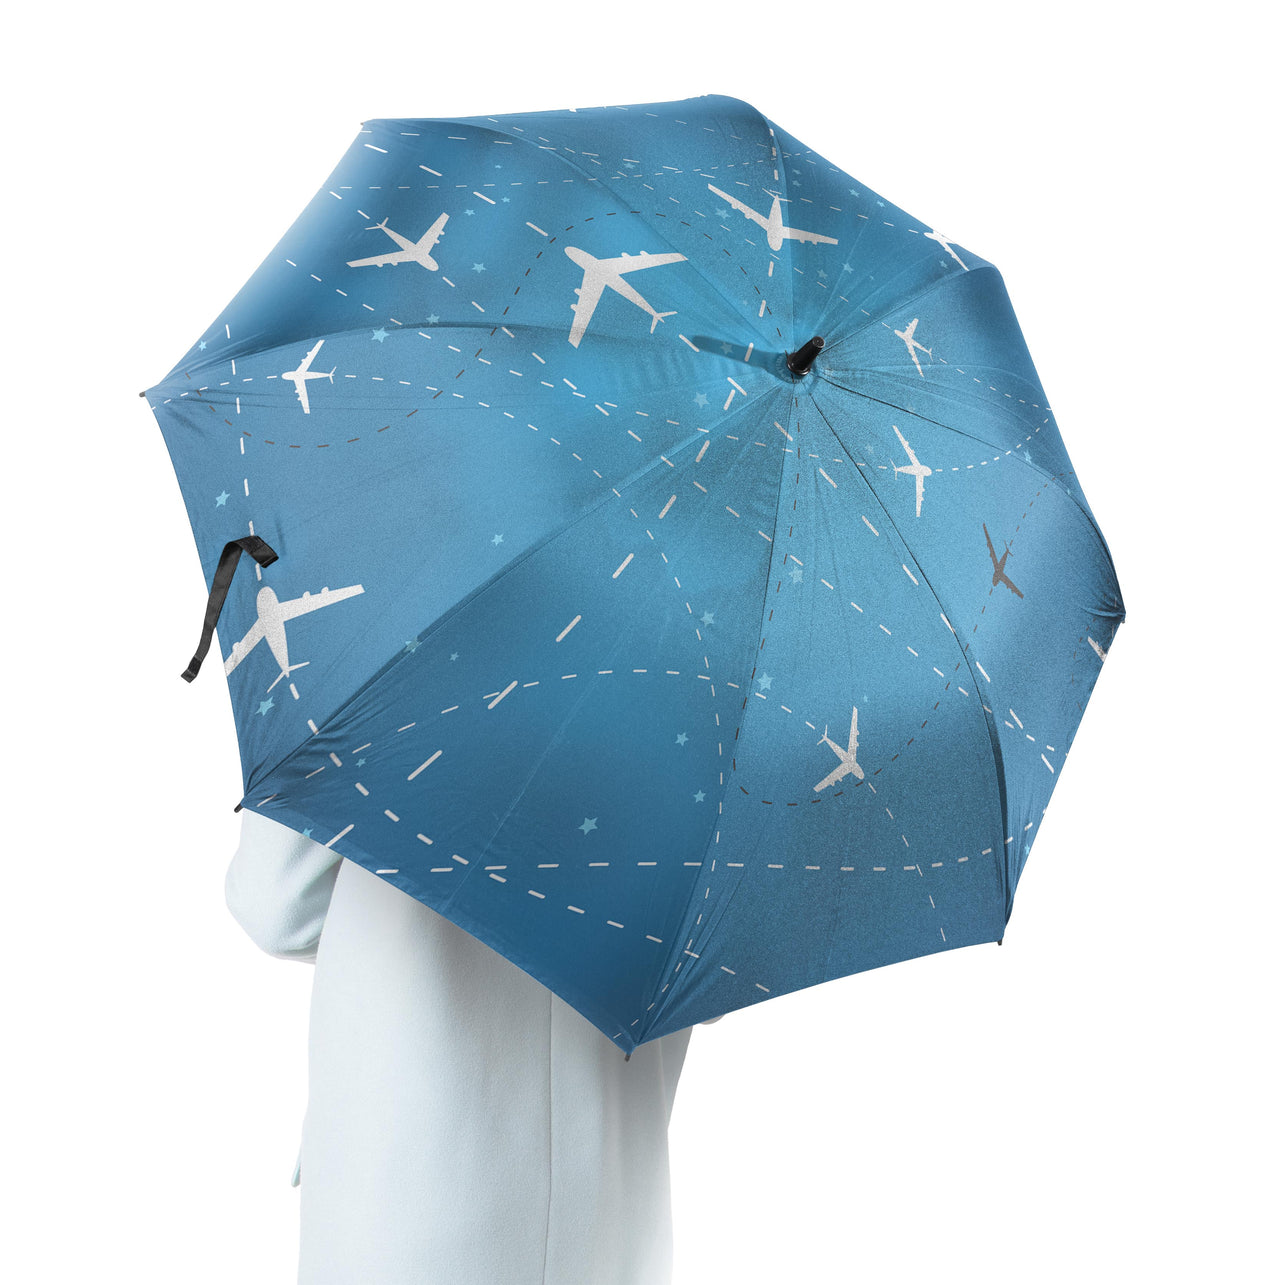 Travelling with Aircraft Designed Umbrella